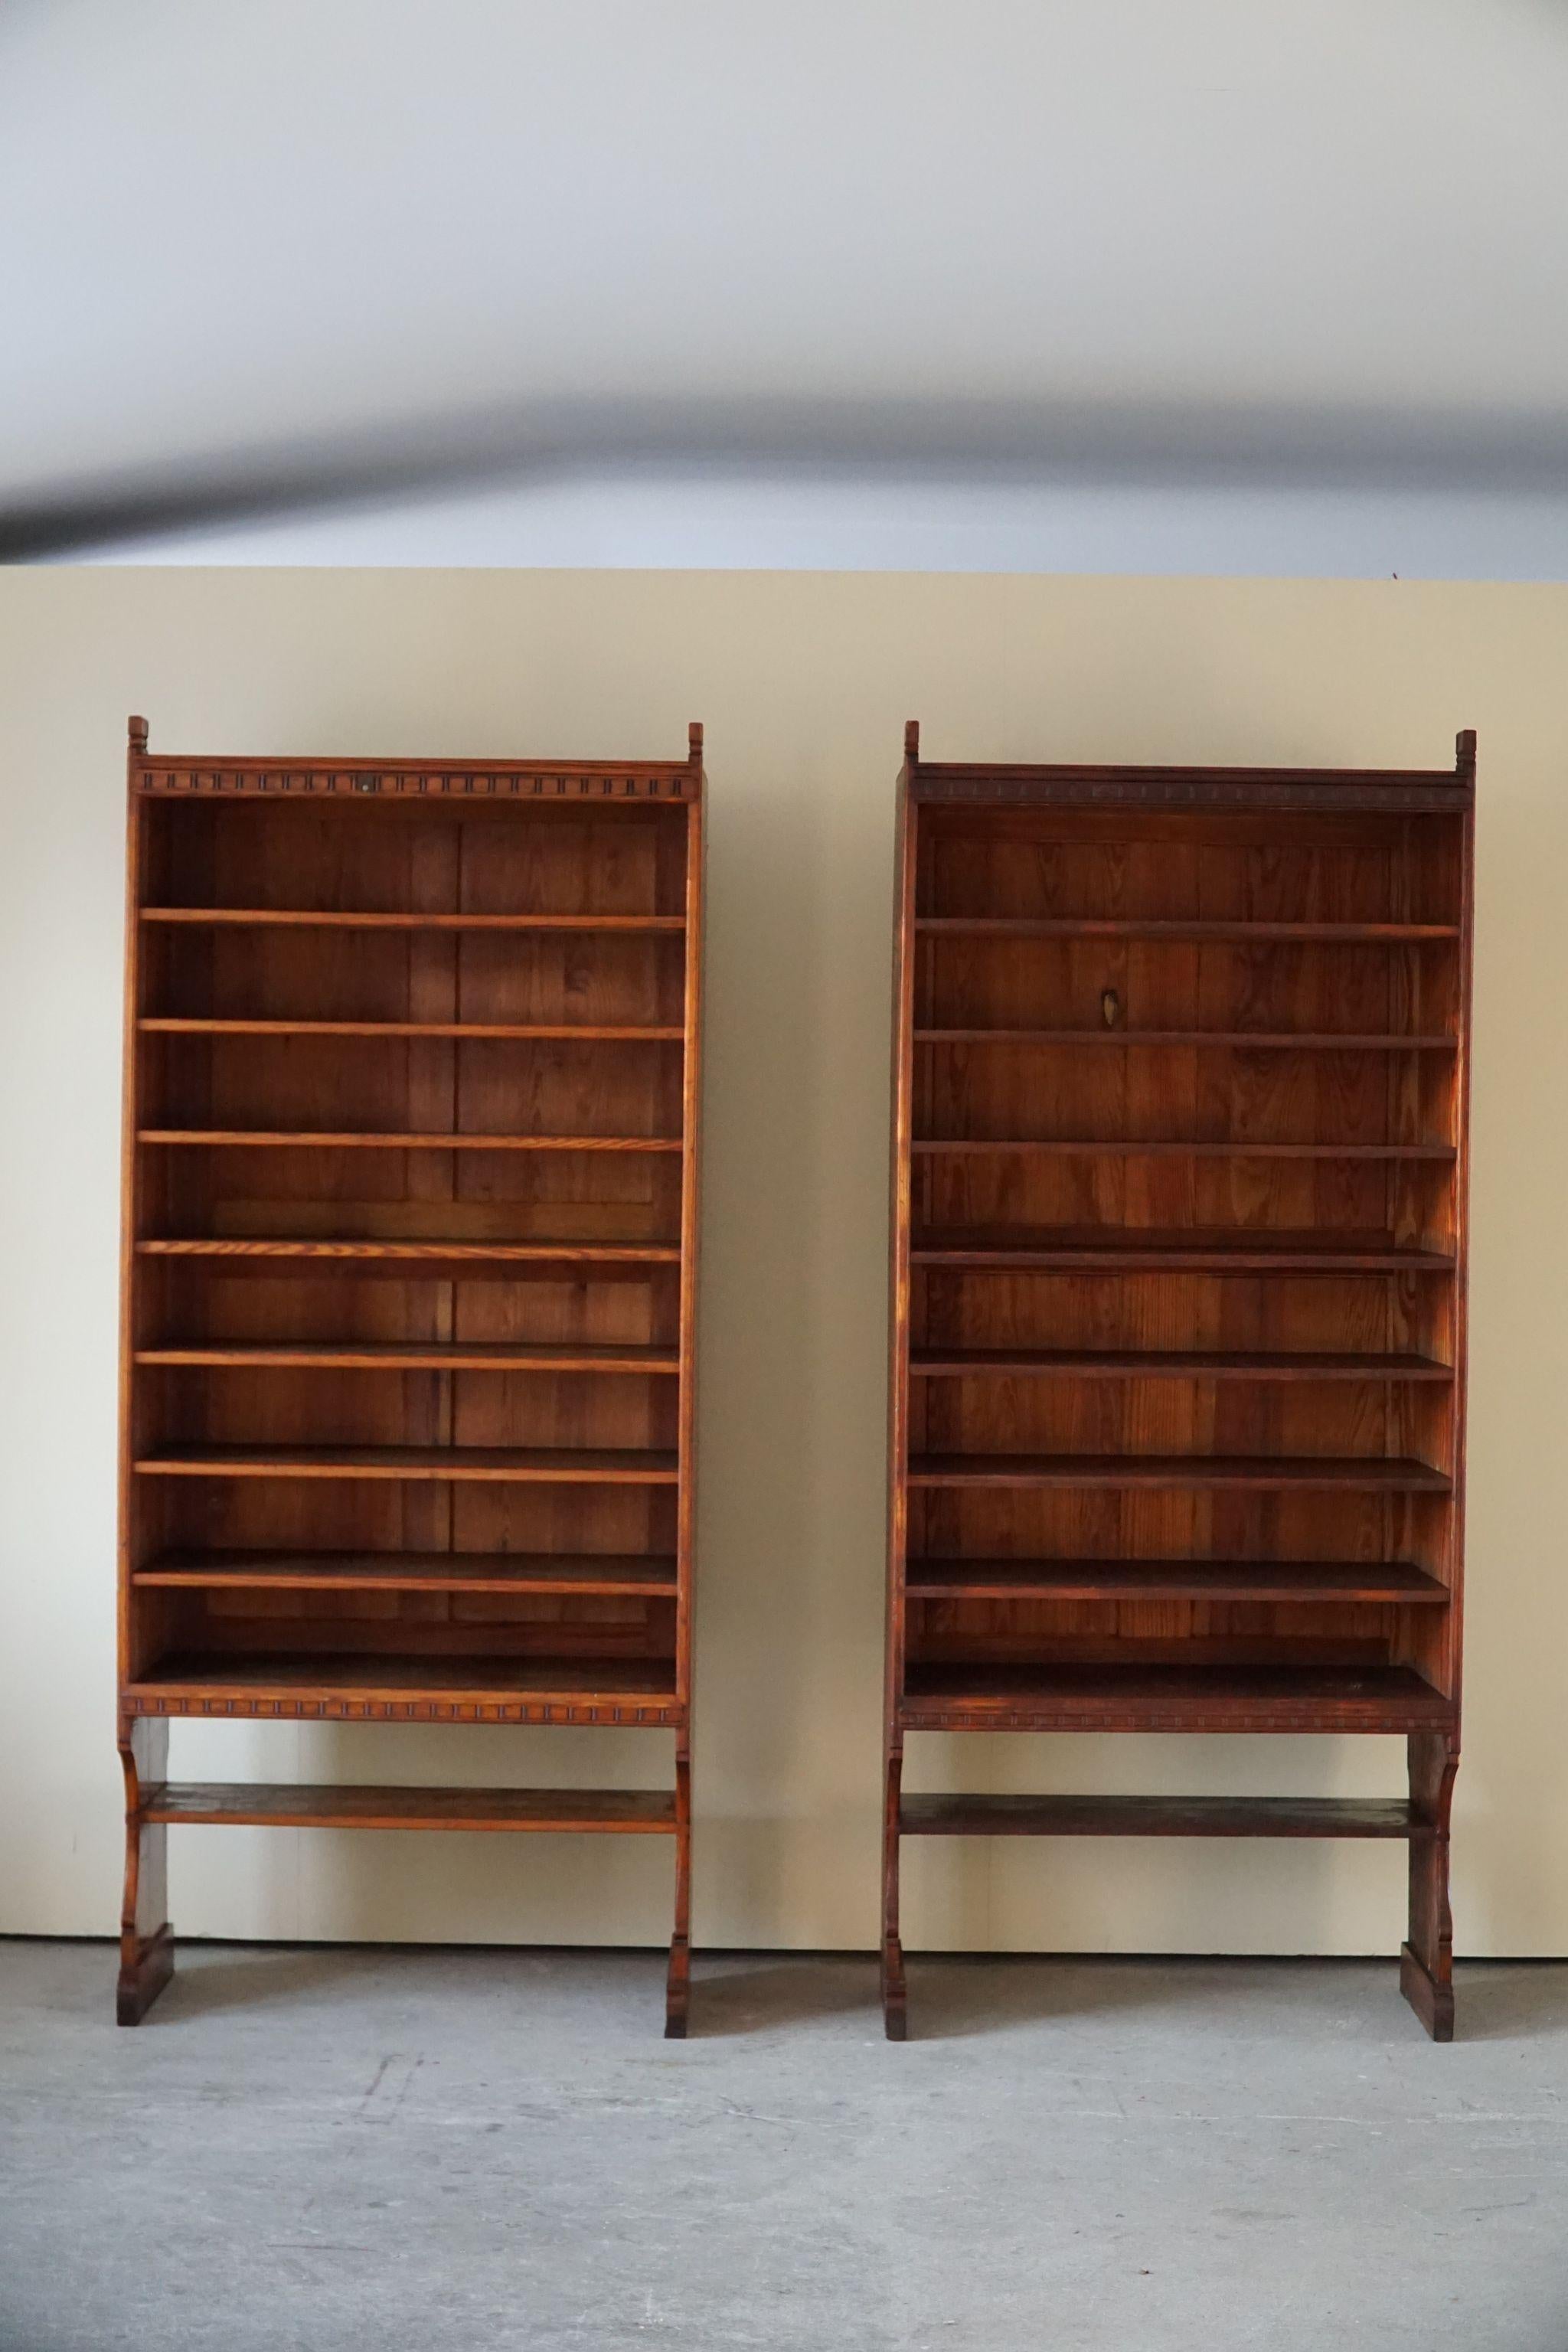 Rare tall pair of bookcases in oregon pine by Danish architect Martin Nyrop (1849-1921) for cabinetmakers Rud. Rasmussen in 1905.
These cabinets were designed for Copenhagen City hall as a custom made project, therefore this is a unique opportunity